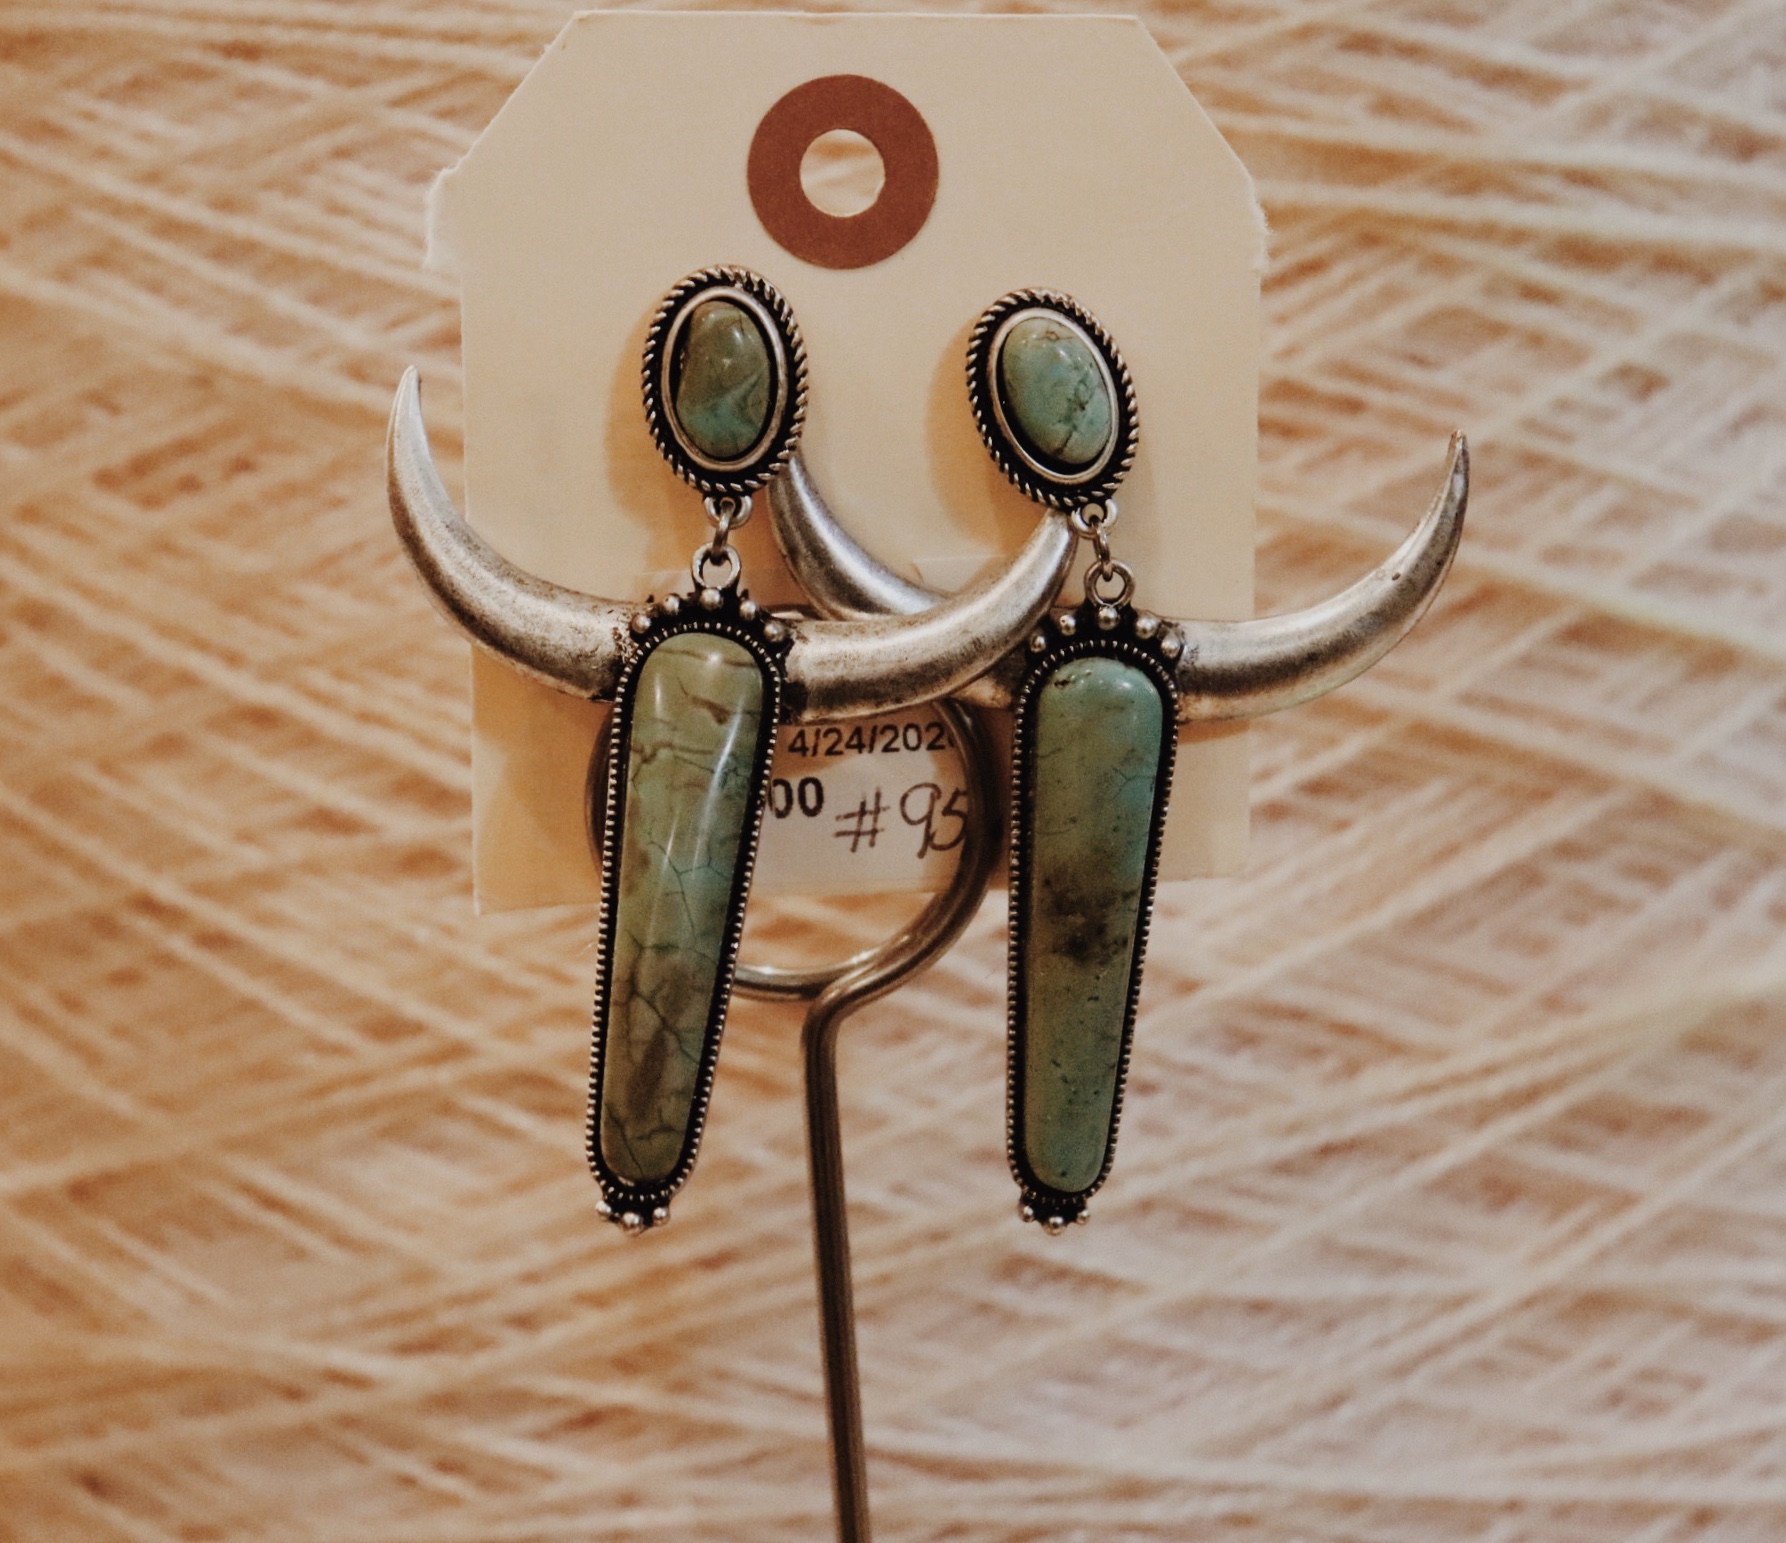 Turquoise Steer Earrings with a silver tone. Medium weight and 3 inches long.